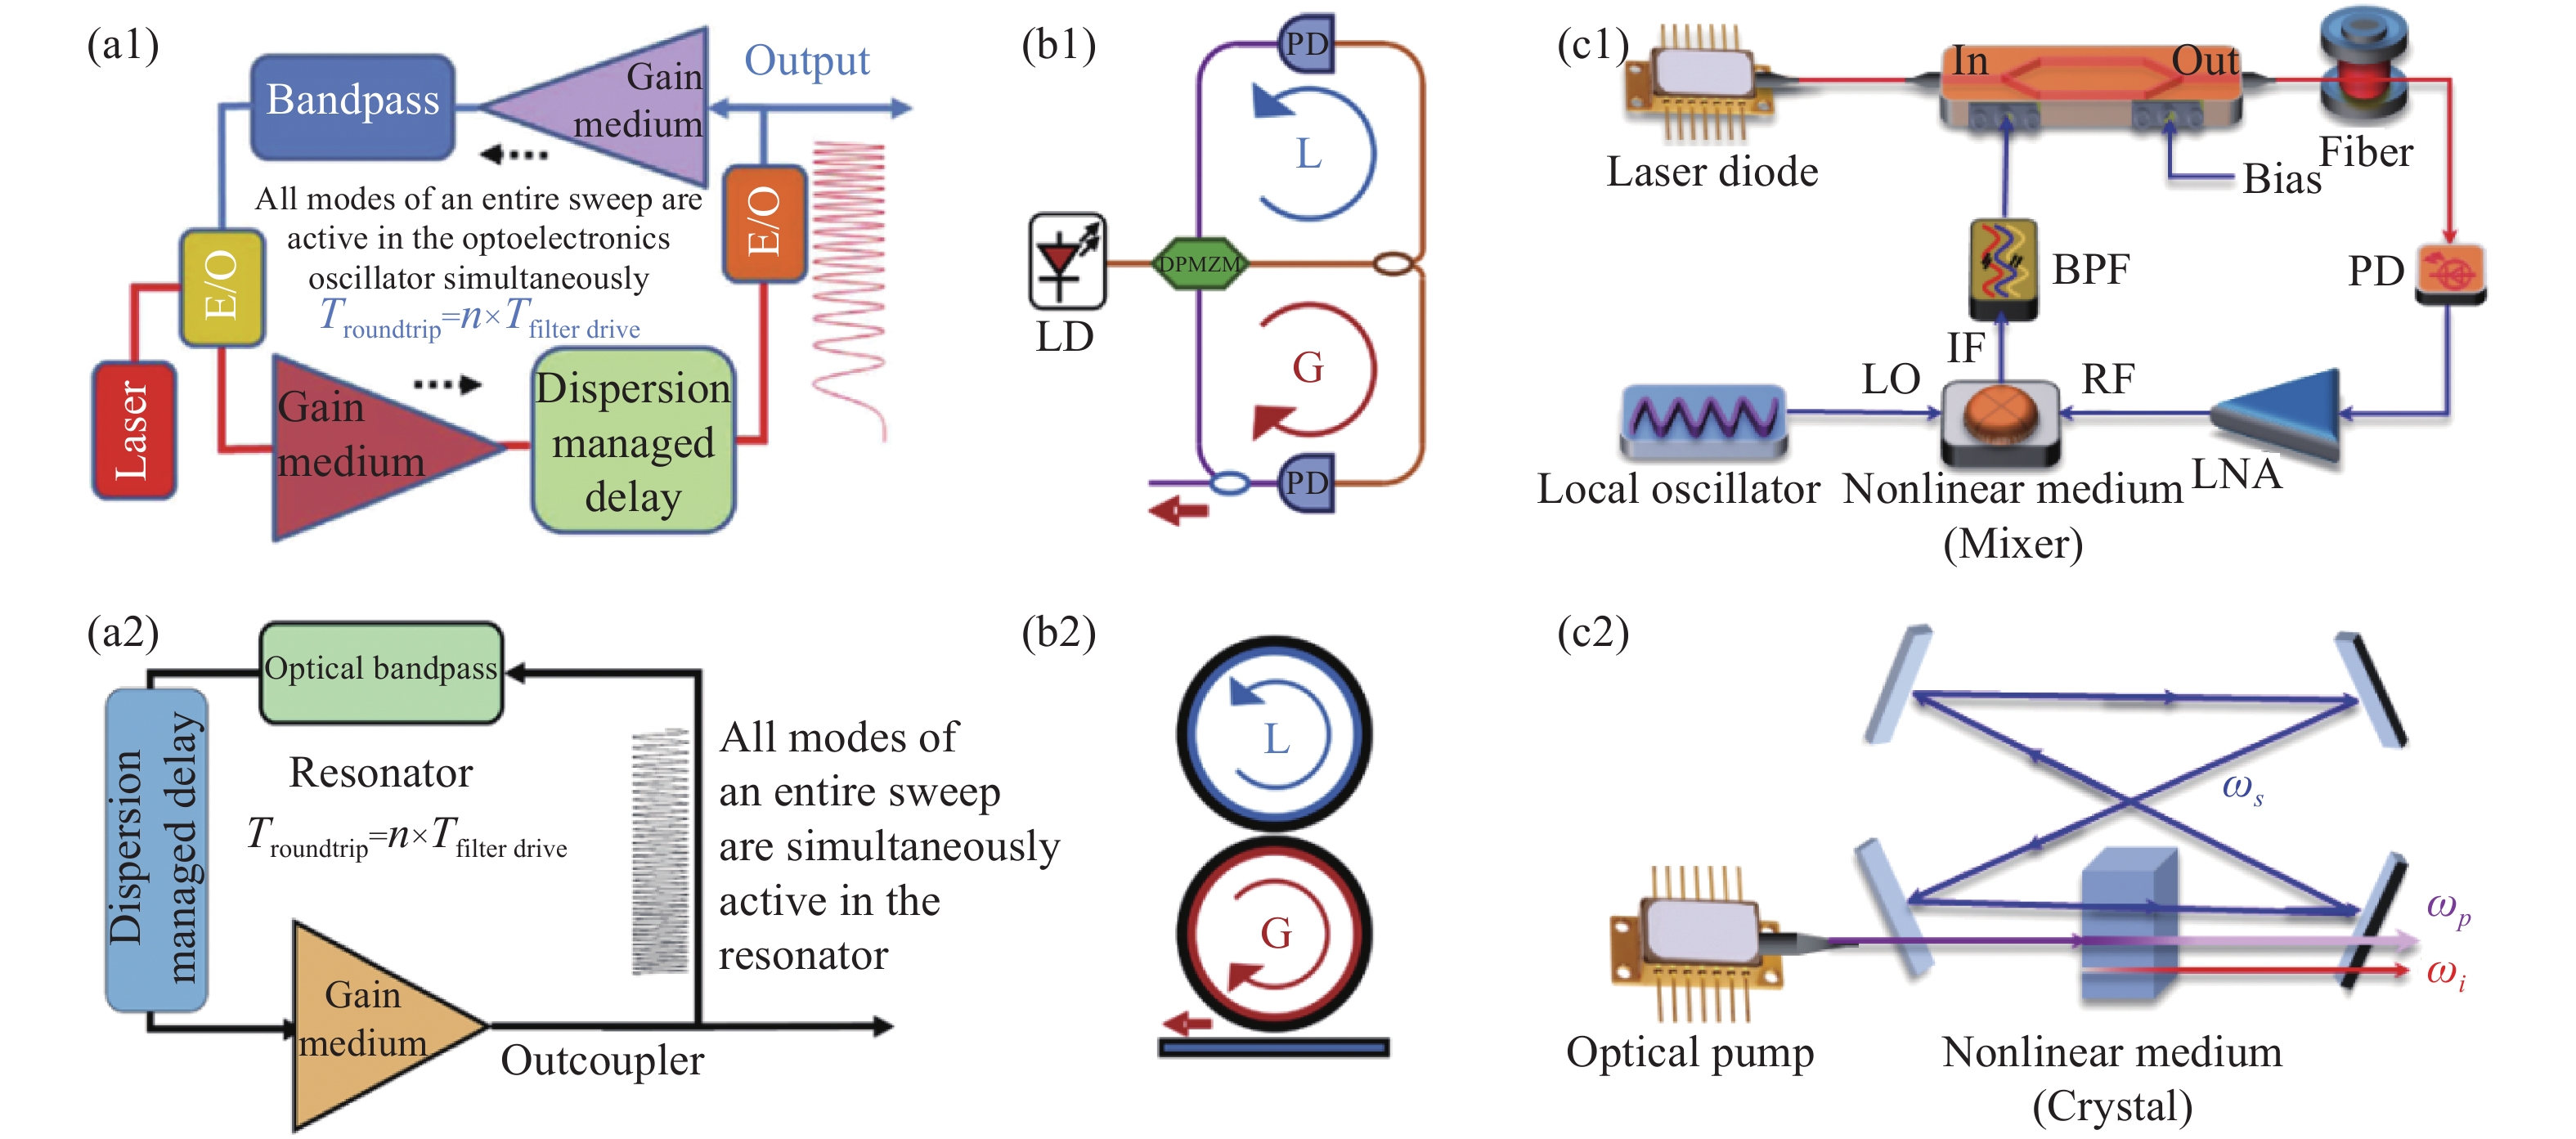 Fused examples of microwave photonics and laser technology. Fourier domain mode locked (FDML) optoelectronic oscillator(a1)[3]and laser(a2)[4]; (b) Parity-time (PT) symmetric optoelectronic oscillator (b1) and laser (b2)[5]; Optoelectronic parametric oscillator (c1) and optical parametric oscillator (c2)[6]